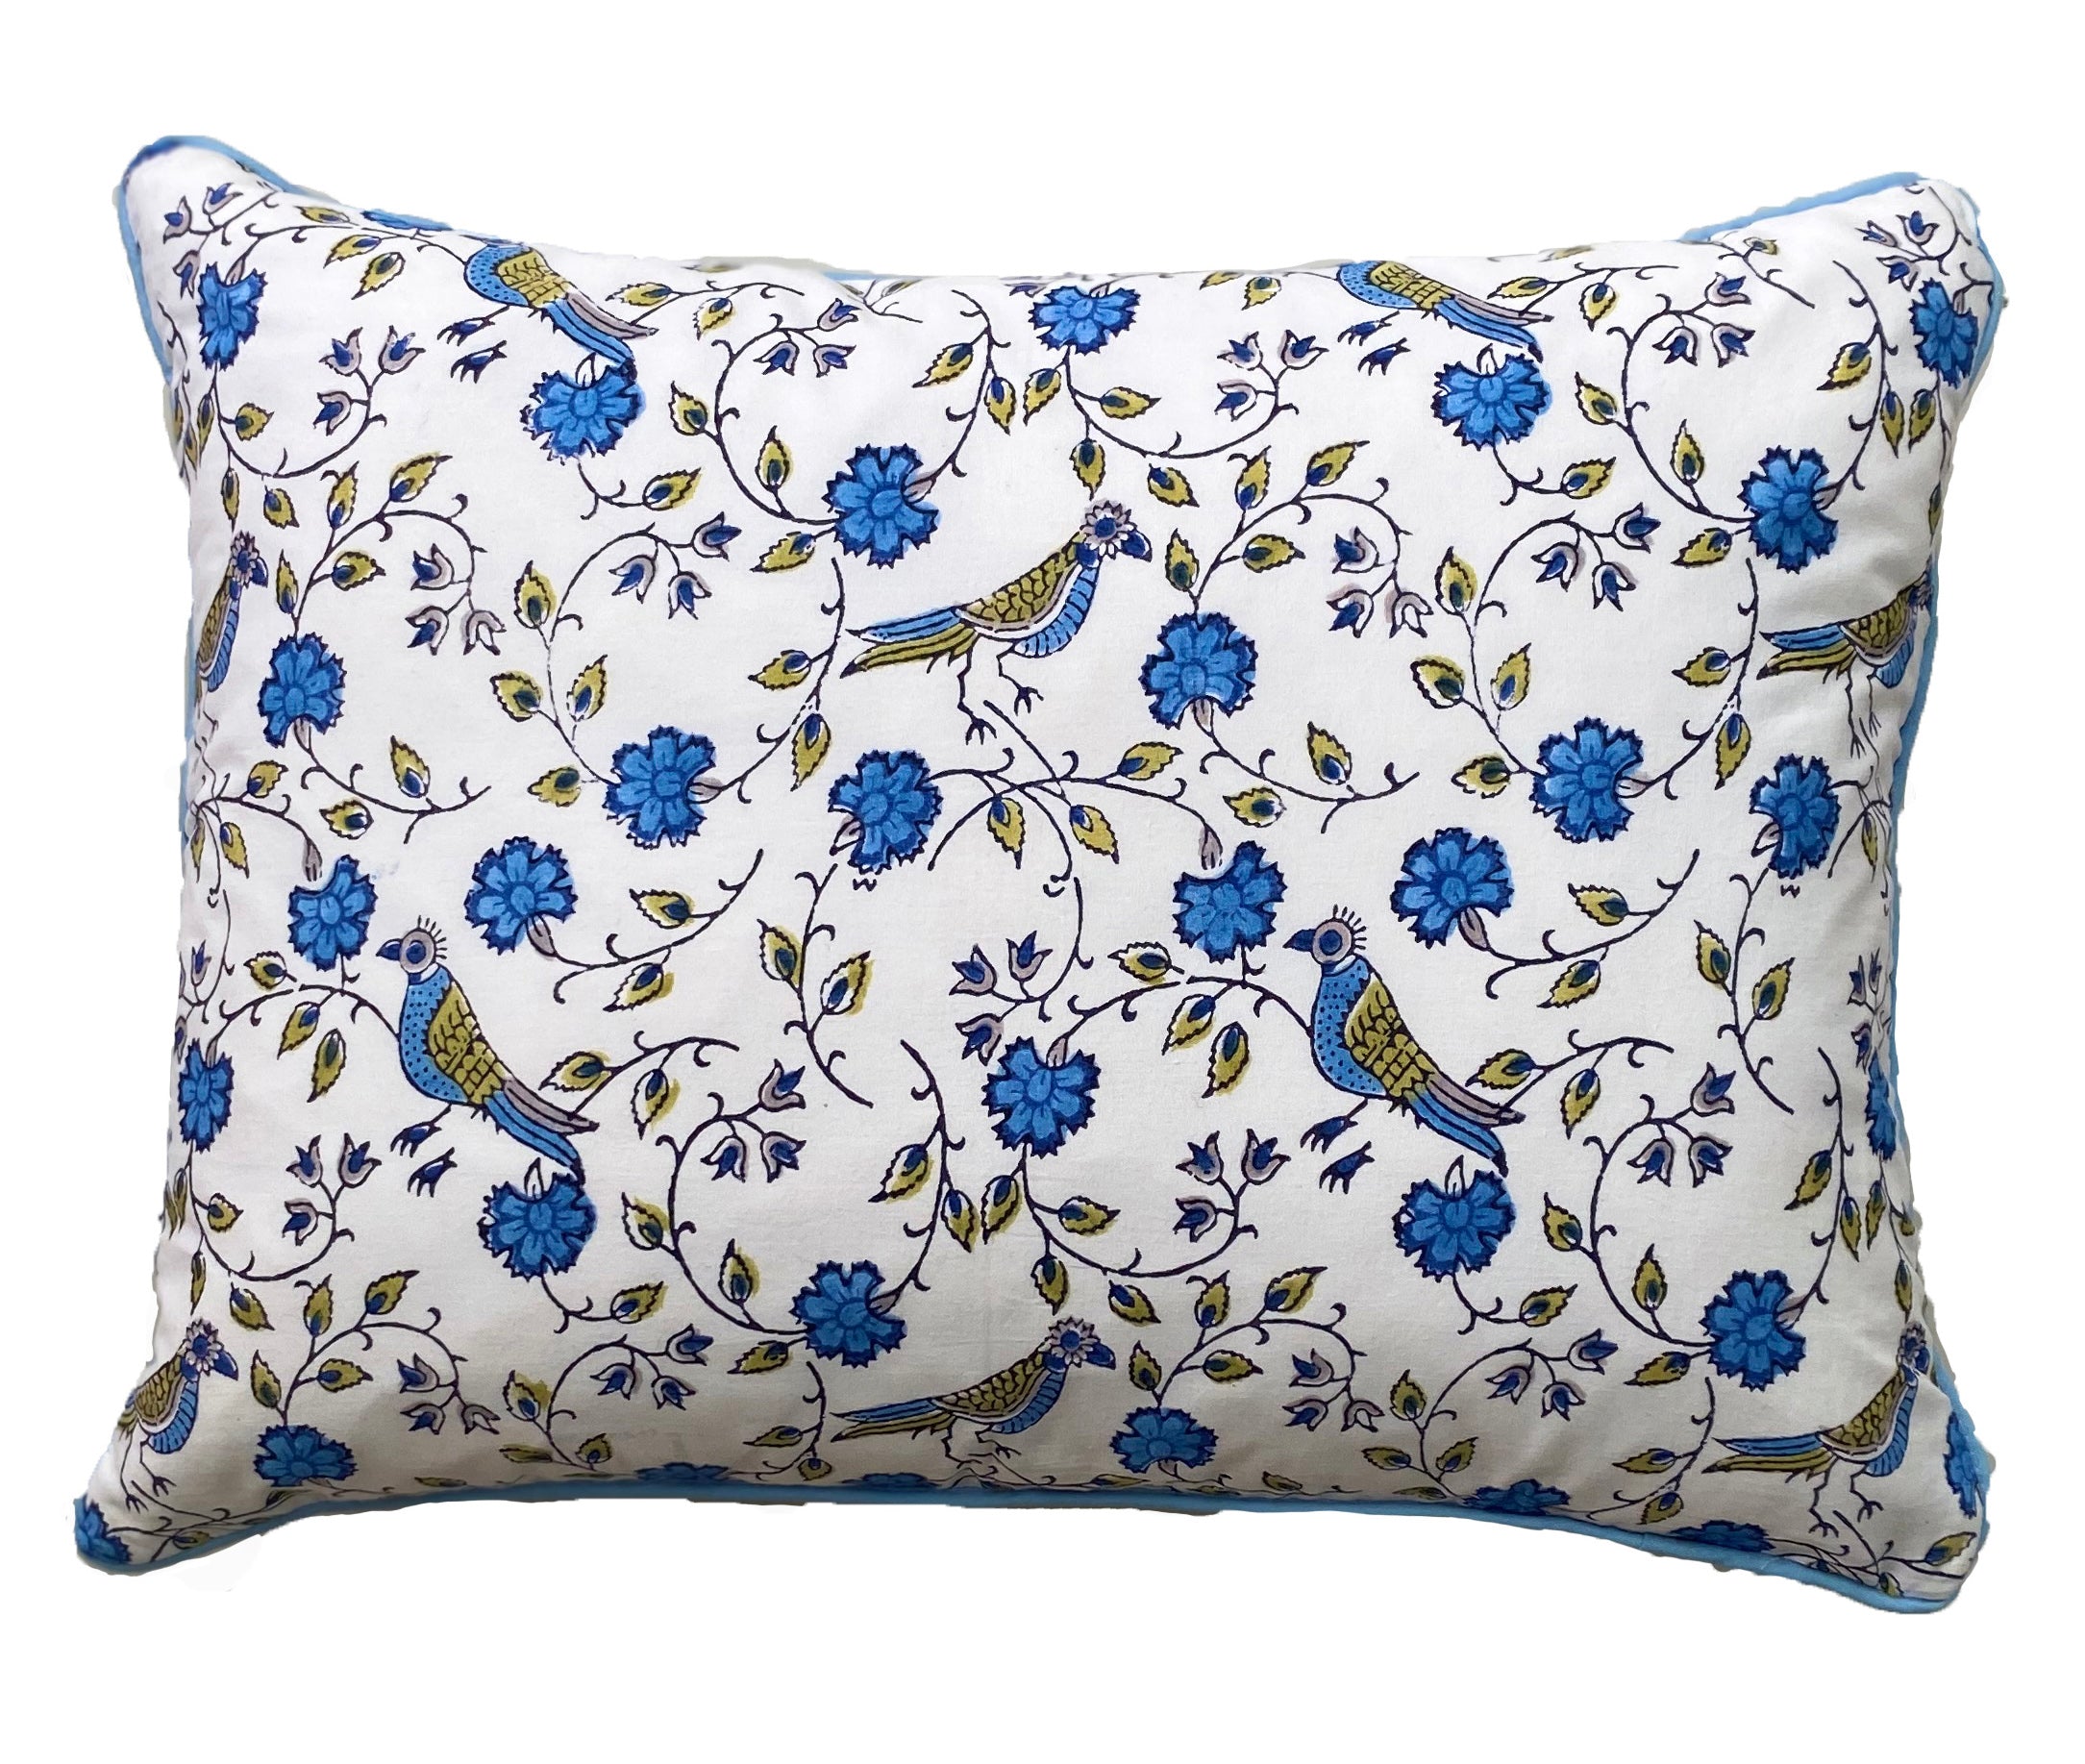 BLOCK PRINT CUSHION IN BIRD JAL BLUE WITH PALE BLUE PIPING